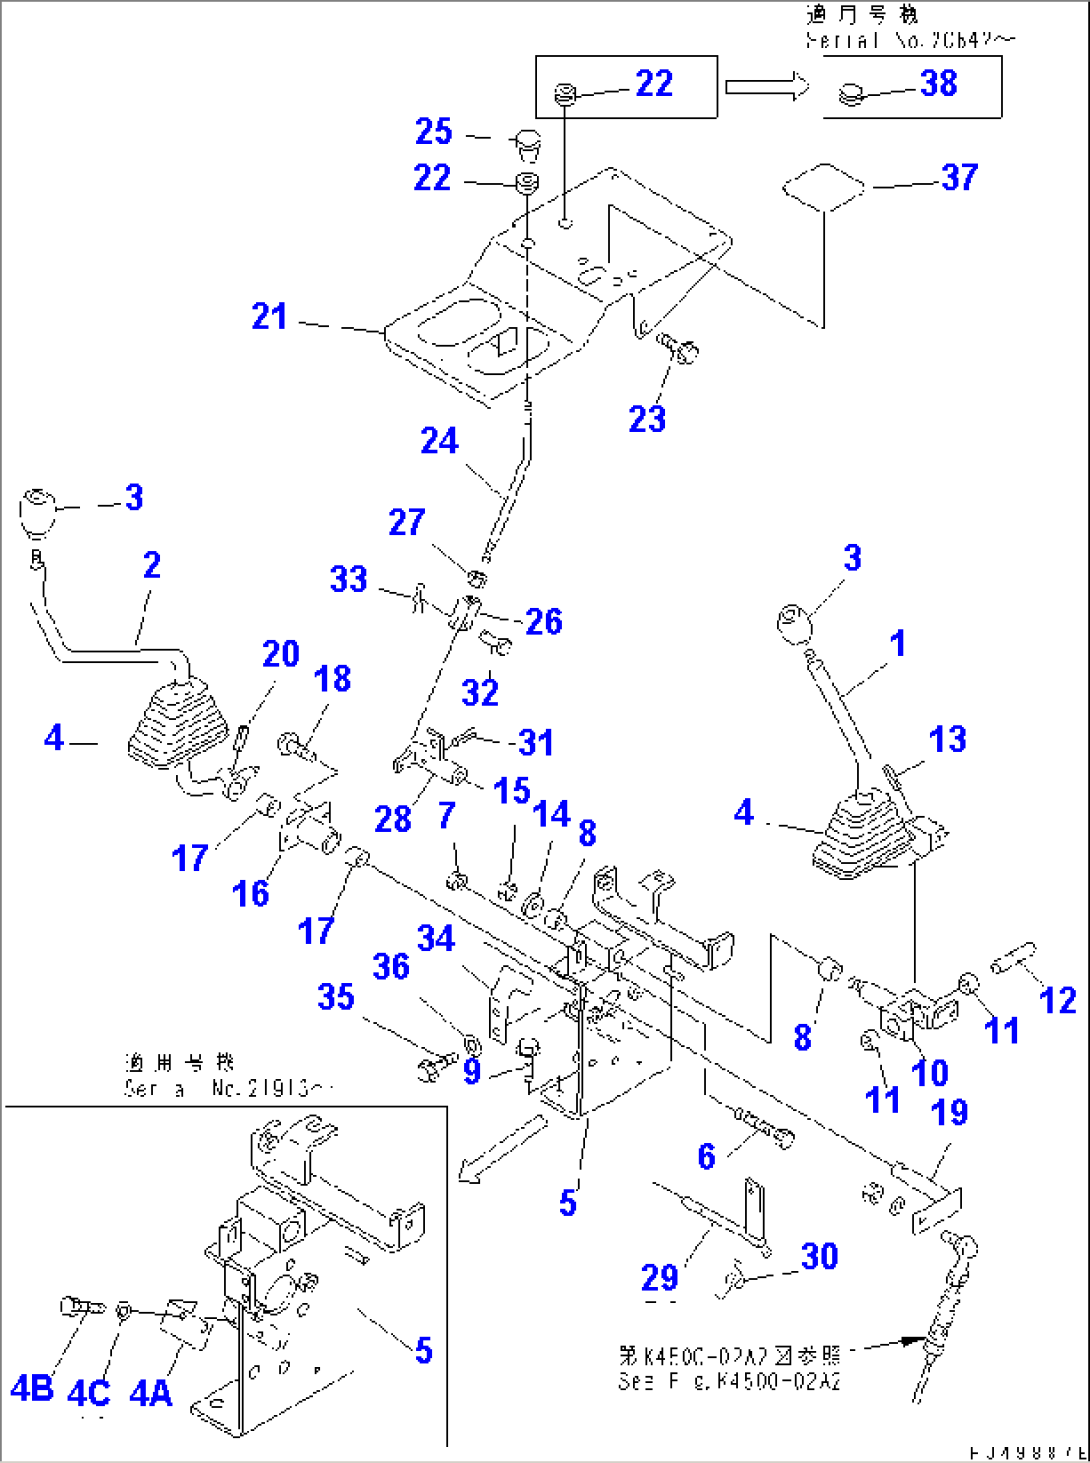 WORK EQUIPMENT CONTROL LEVER AND LINKAGE (1/2) (WITH FRONT ATTACHMENT)